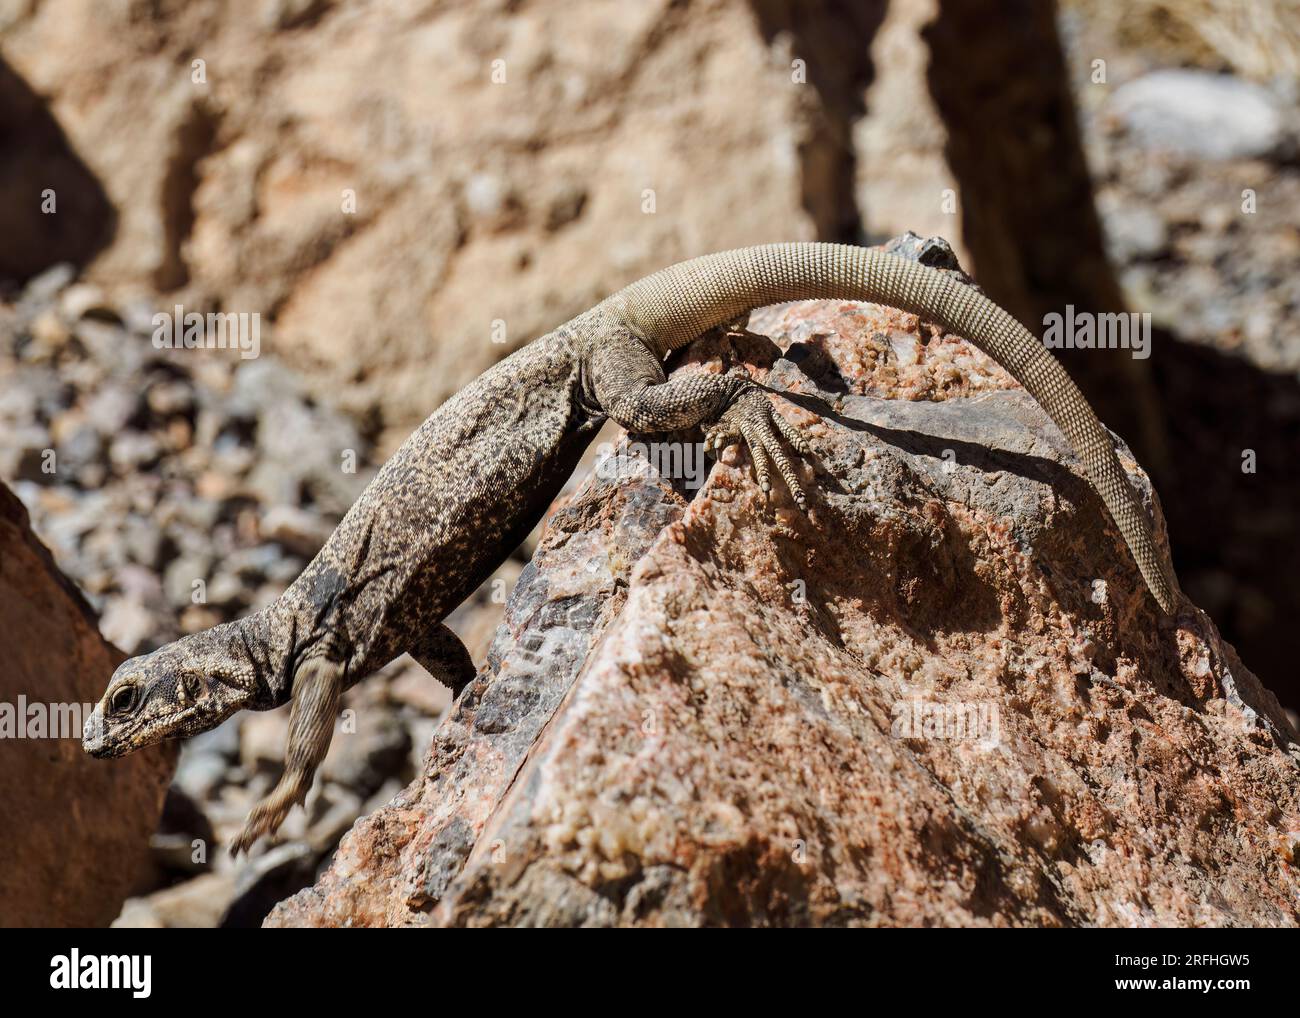 Common chuckwalla, Sauromalus ater, Leadfield in Titus Canyon in Death Valley National Park, California, USA. Stock Photo